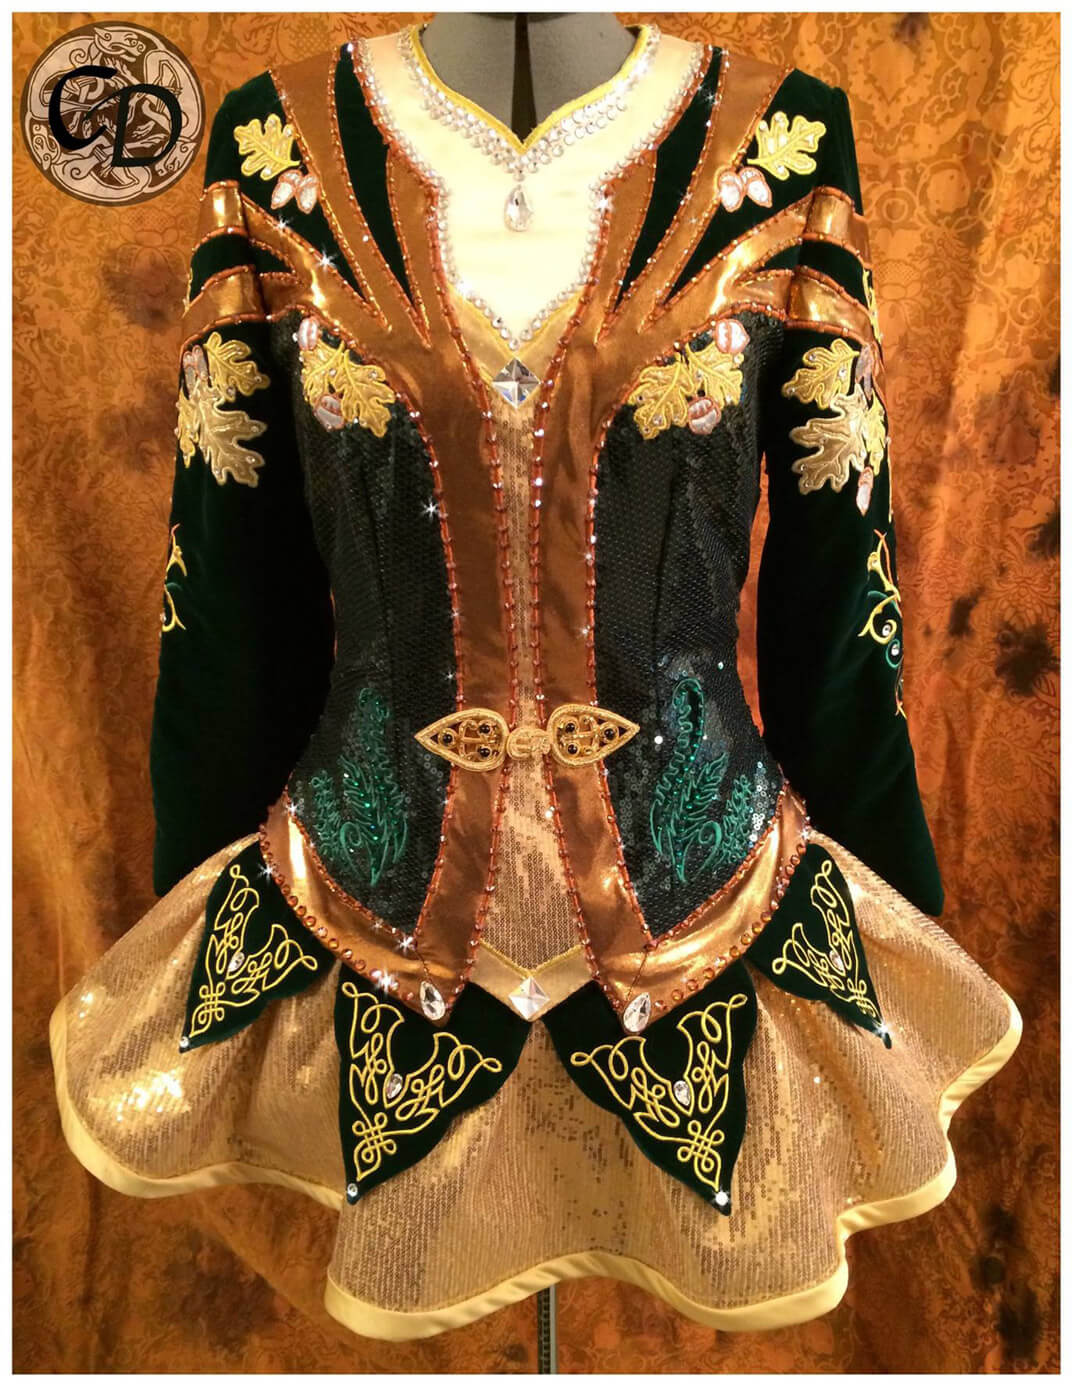 The Forest Fairy Irish Dance Solo Dress - The story behind the symbols ...